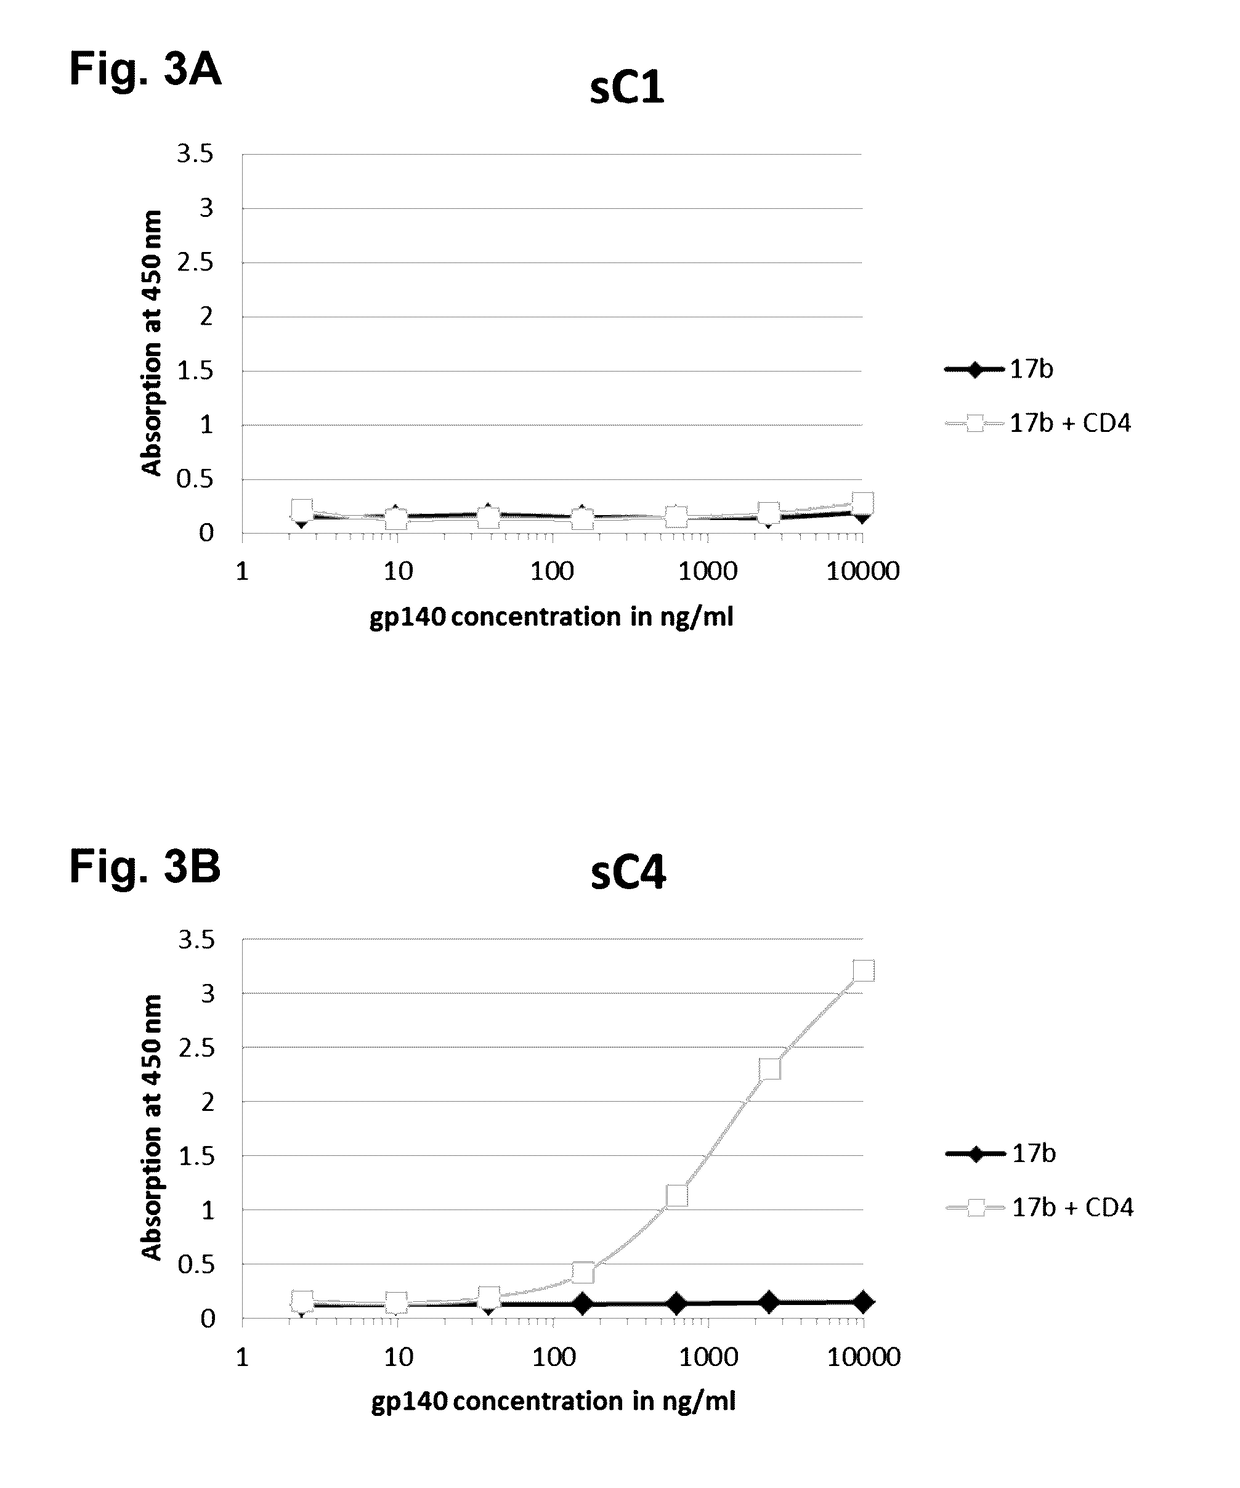 Human immunodeficiency virus antigens, vectors, compositions, and methods of use thereof